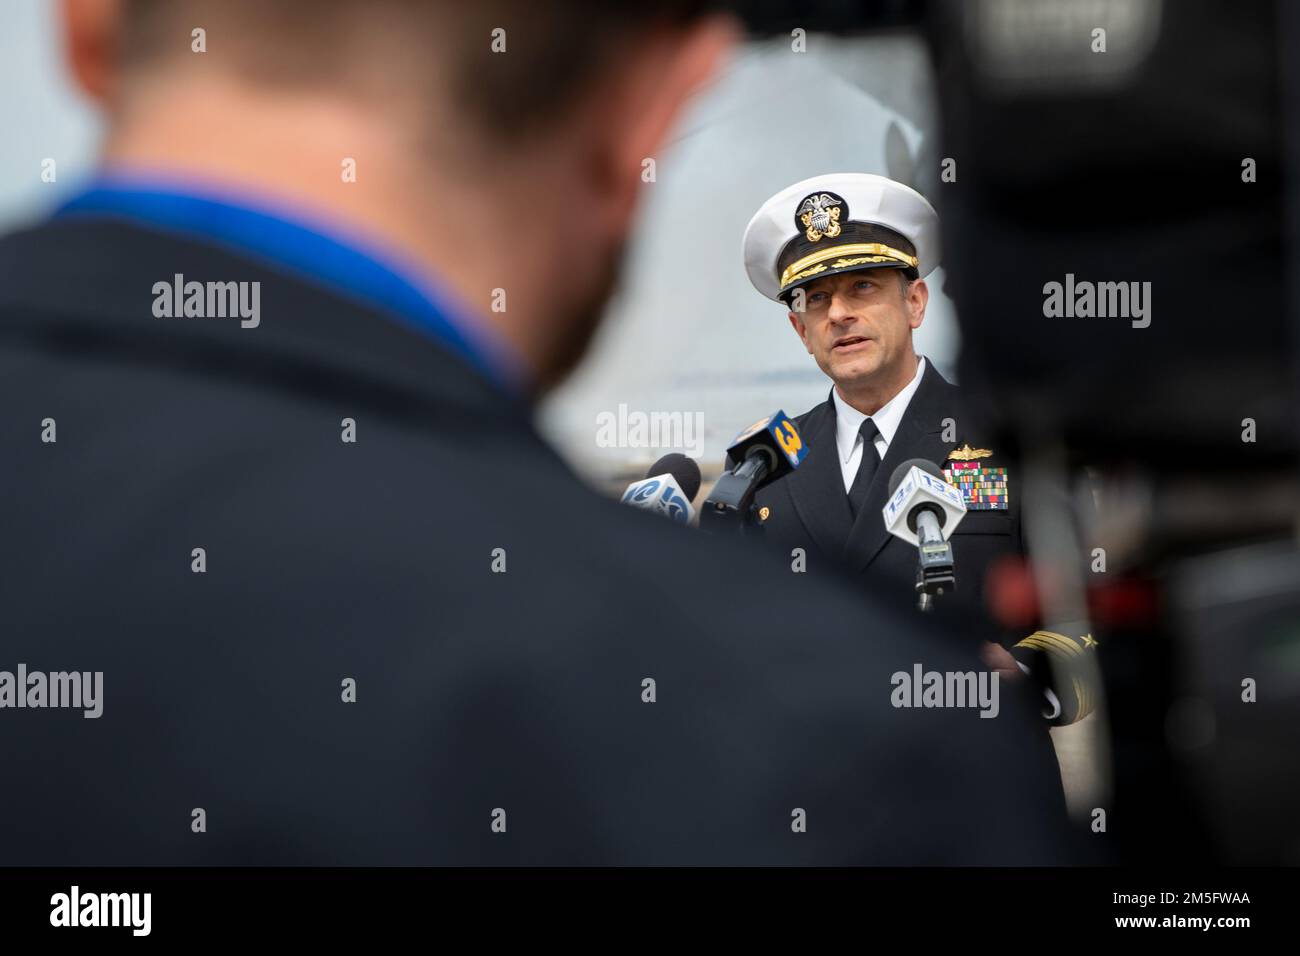 NORFOLK, Virginia – Capt. David Guluzian, Commander of the the Kearsarge Amphibious Ready Group (ARG) delivers remarks during a media interview prior to the Wasp-class amphibious assault ship USS Kearsarge (LHD 3) departing for deployment, Mar. 16, 2022. The Kearsarge ARG and 22nd Marine Expeditionary Unit (MEU) are operating in the Atlantic Ocean in support of naval operations to maintain maritime stability and security in order to ensure access, deter aggression and defend U.S., allied and partner interests. Stock Photo